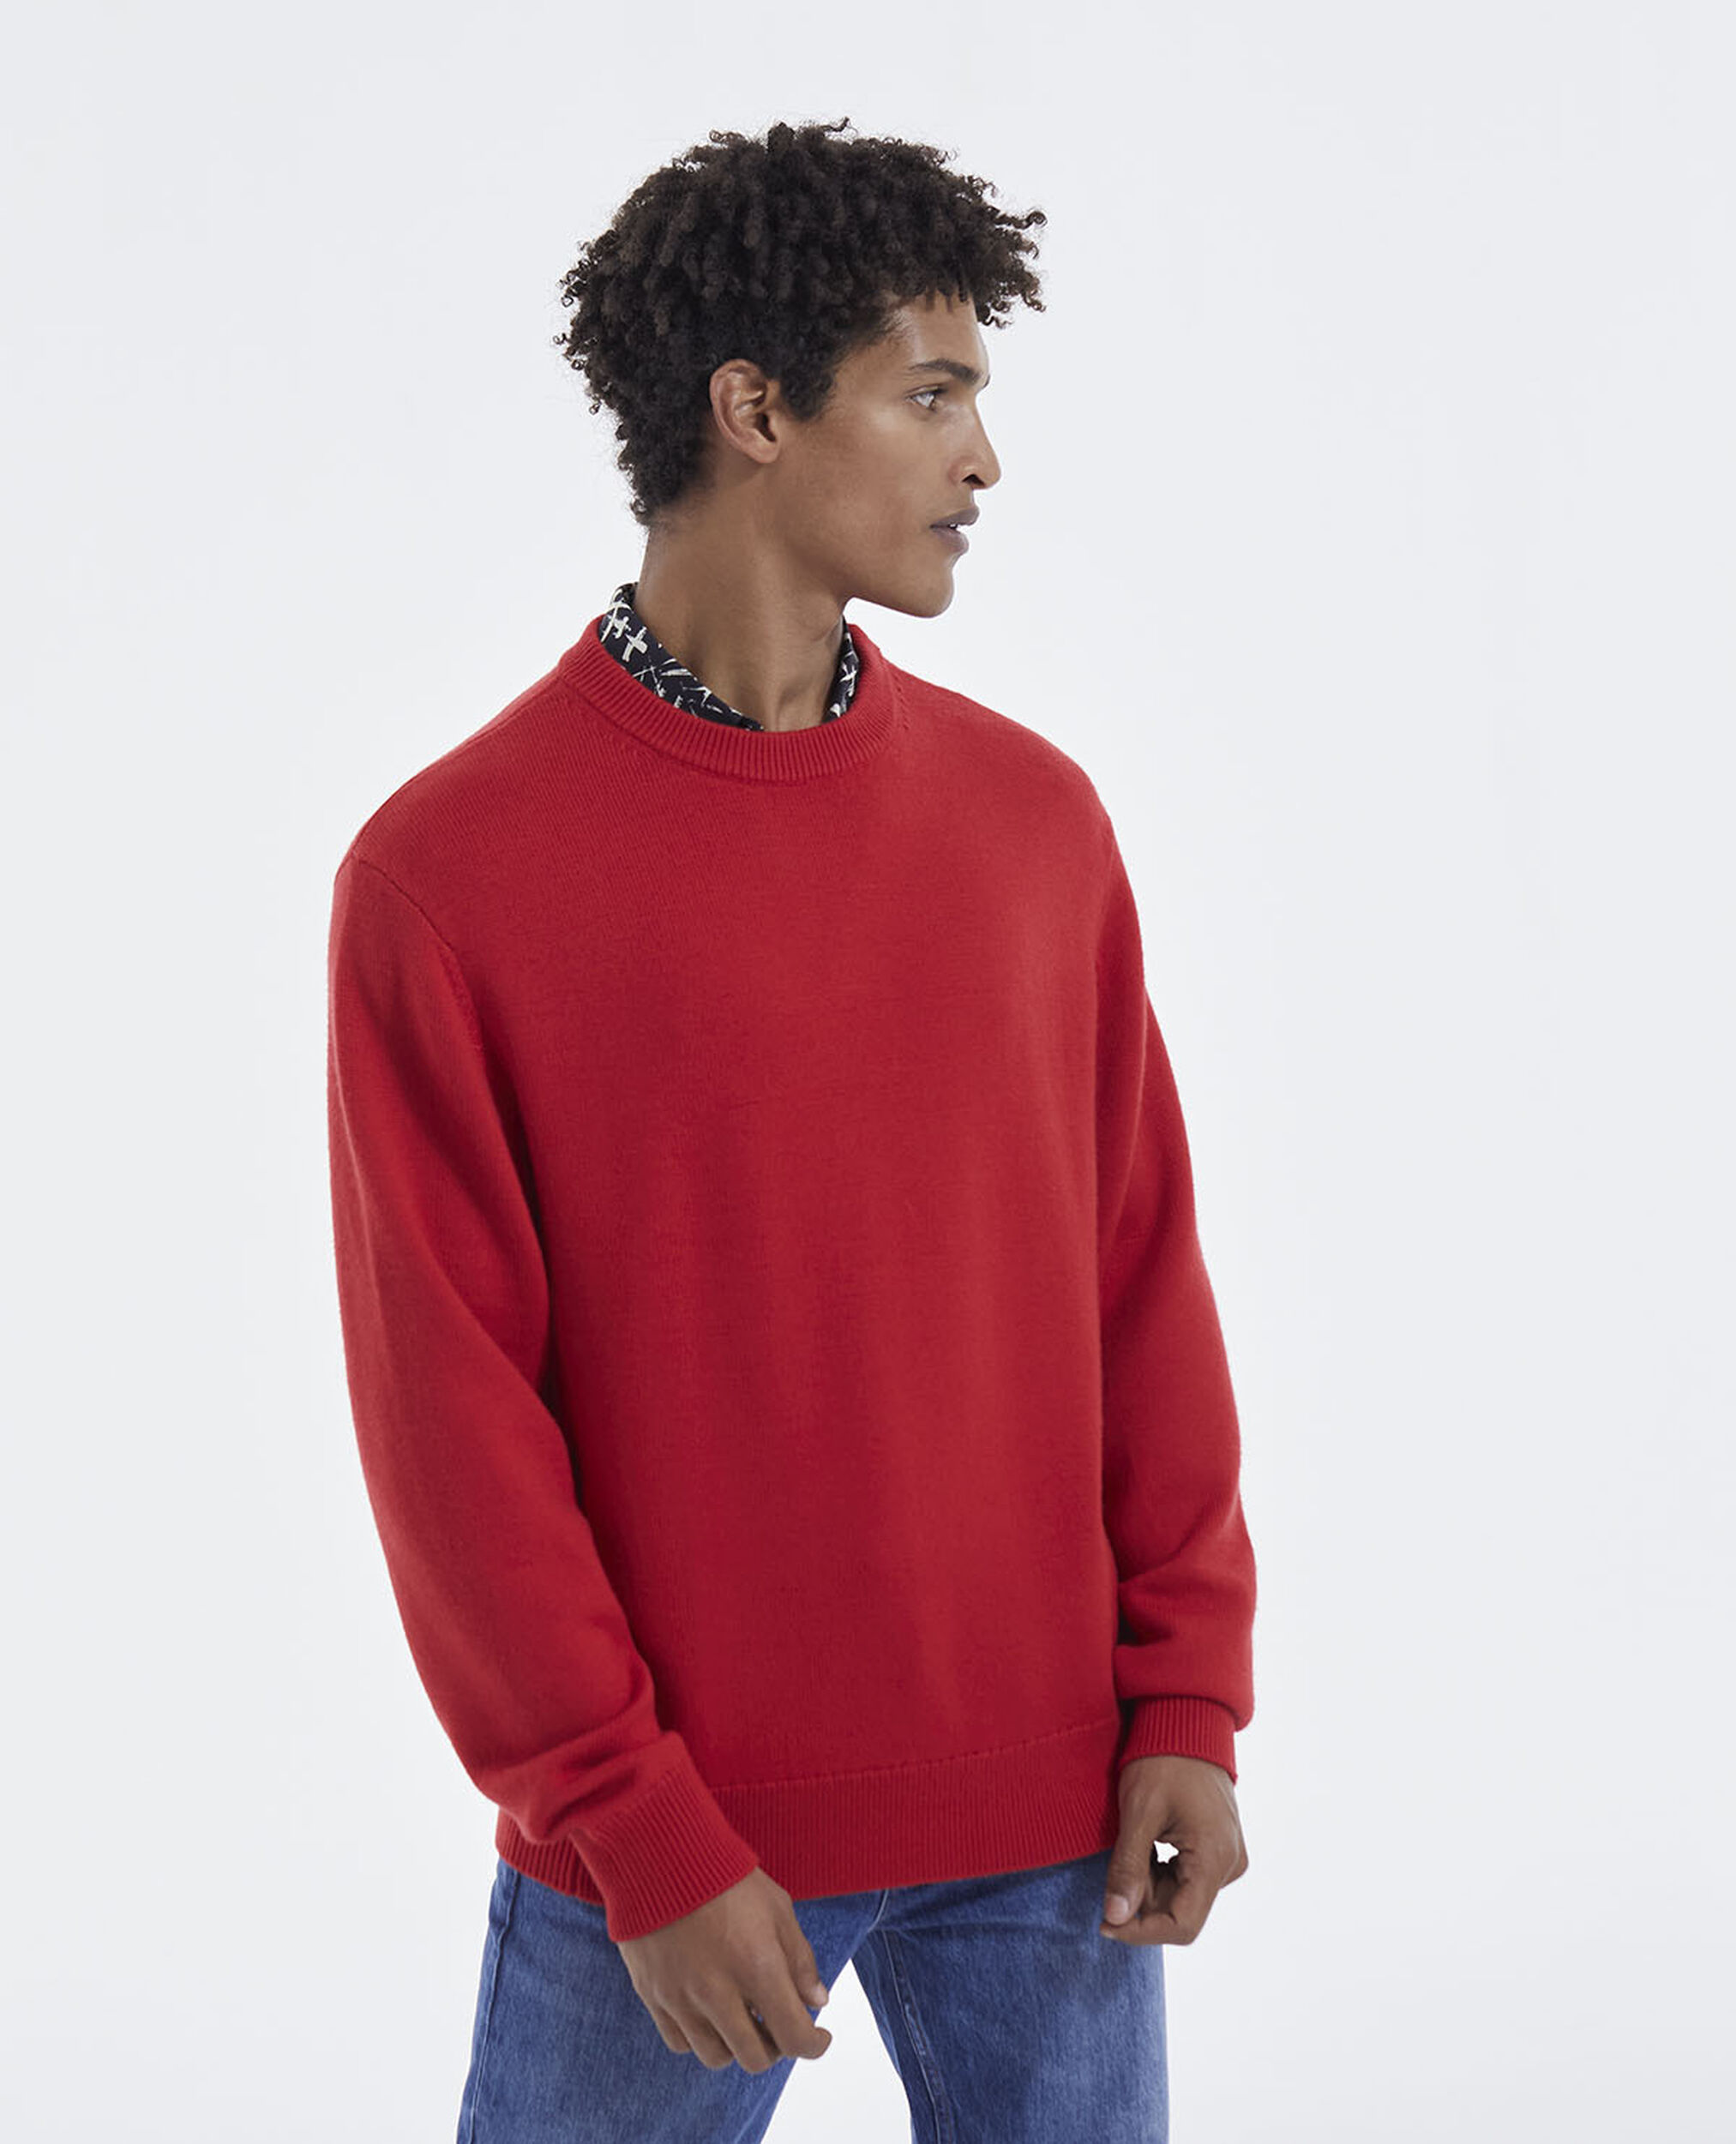 Classic fit red wool sweater with crew neck, RED, hi-res image number null